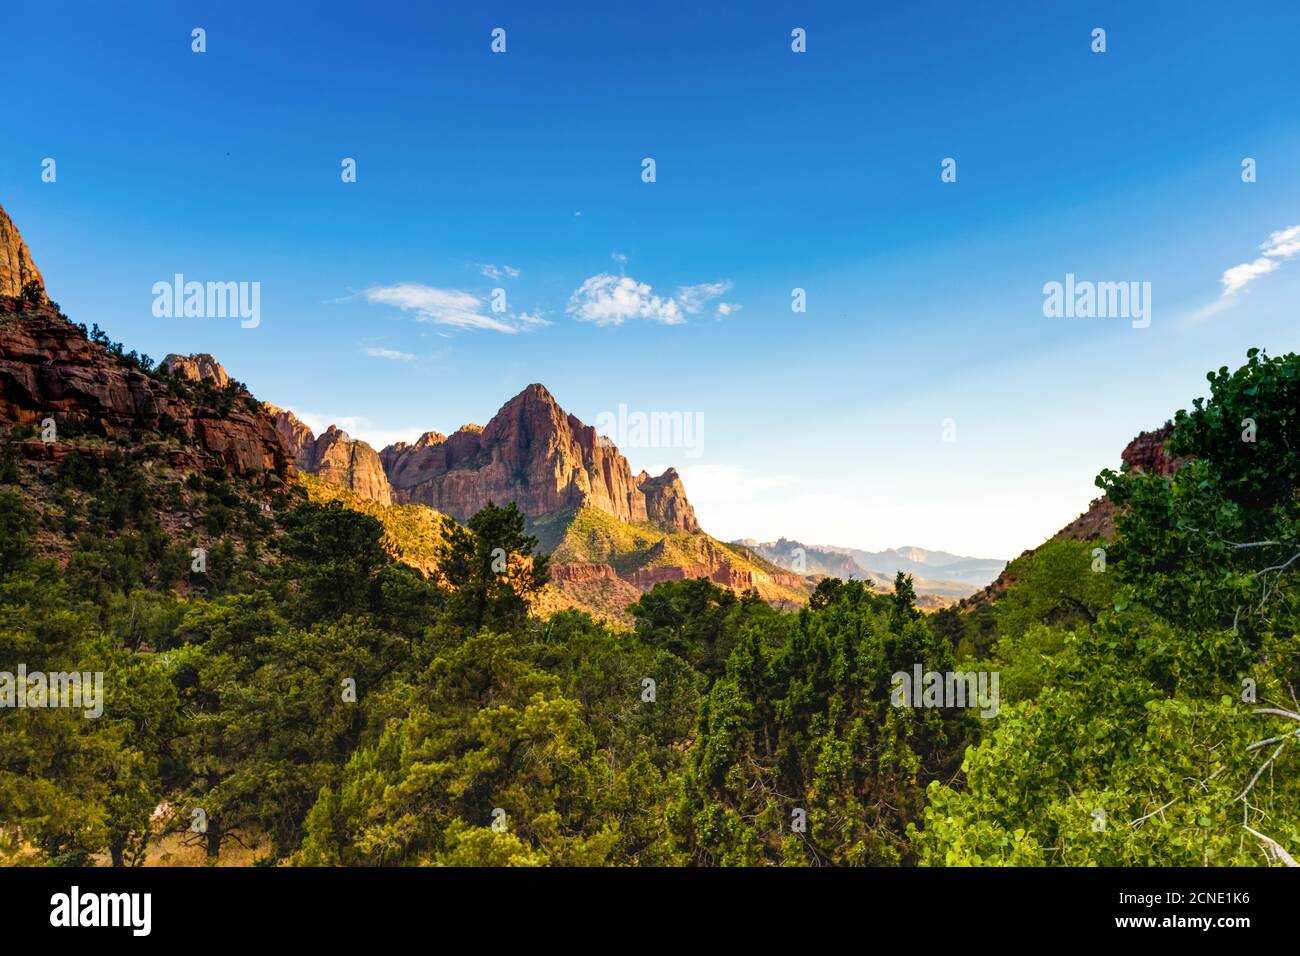 Scenic view in Zion National Park, Utah, United States of America Stock Photo